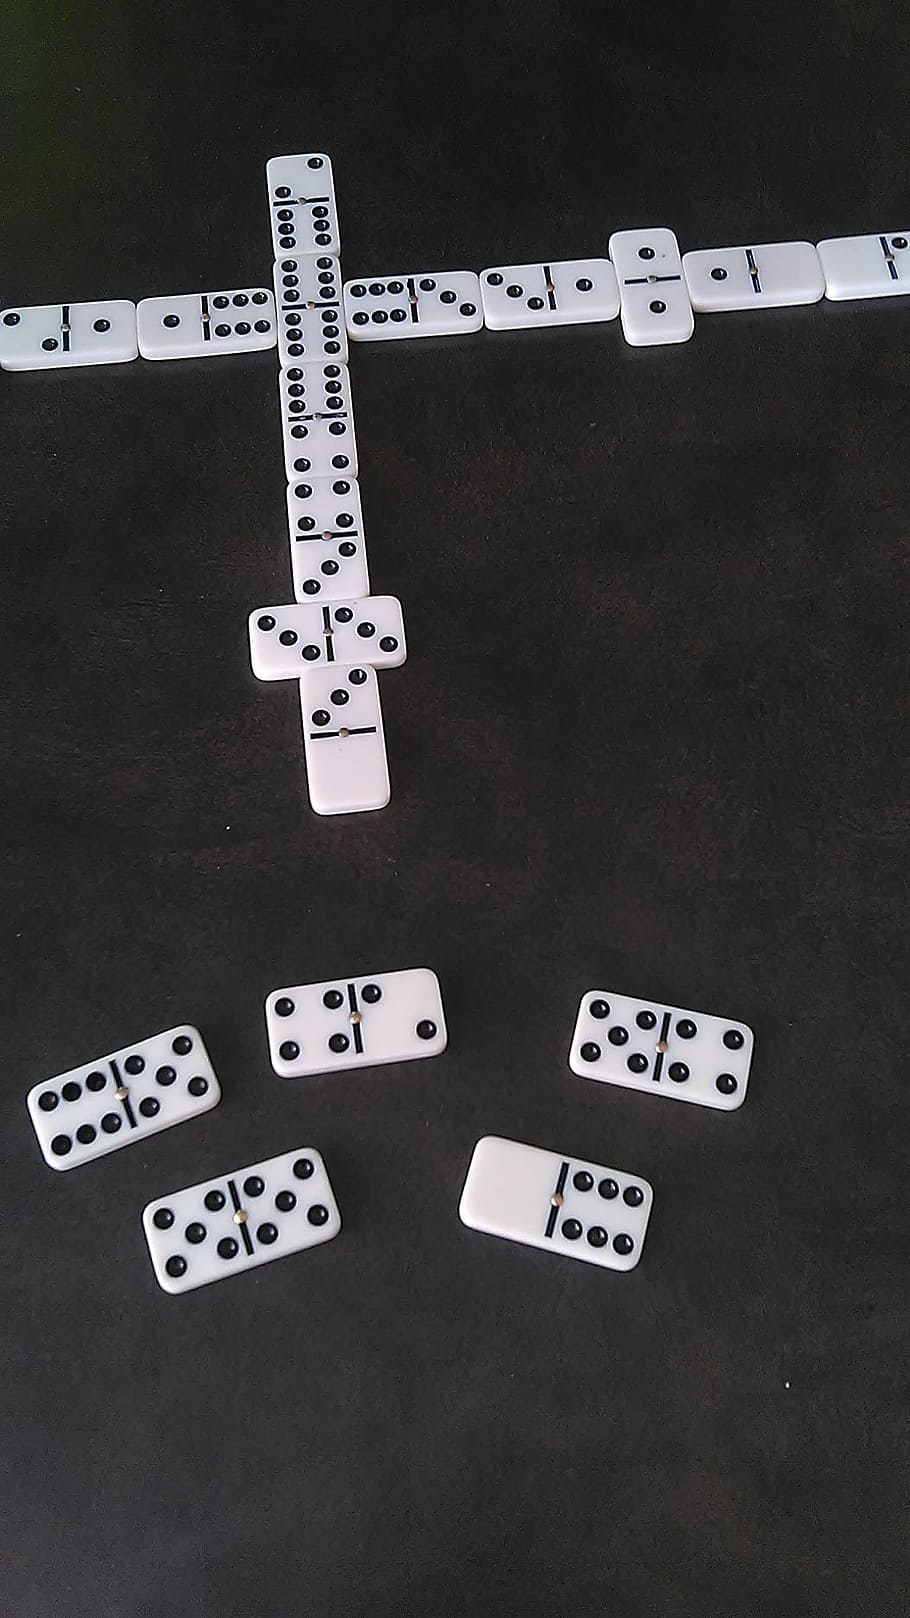 Domino game 1080P, 2K, 4K, 5K HD wallpapers free download, sort by relevance - Wallpaper Flare